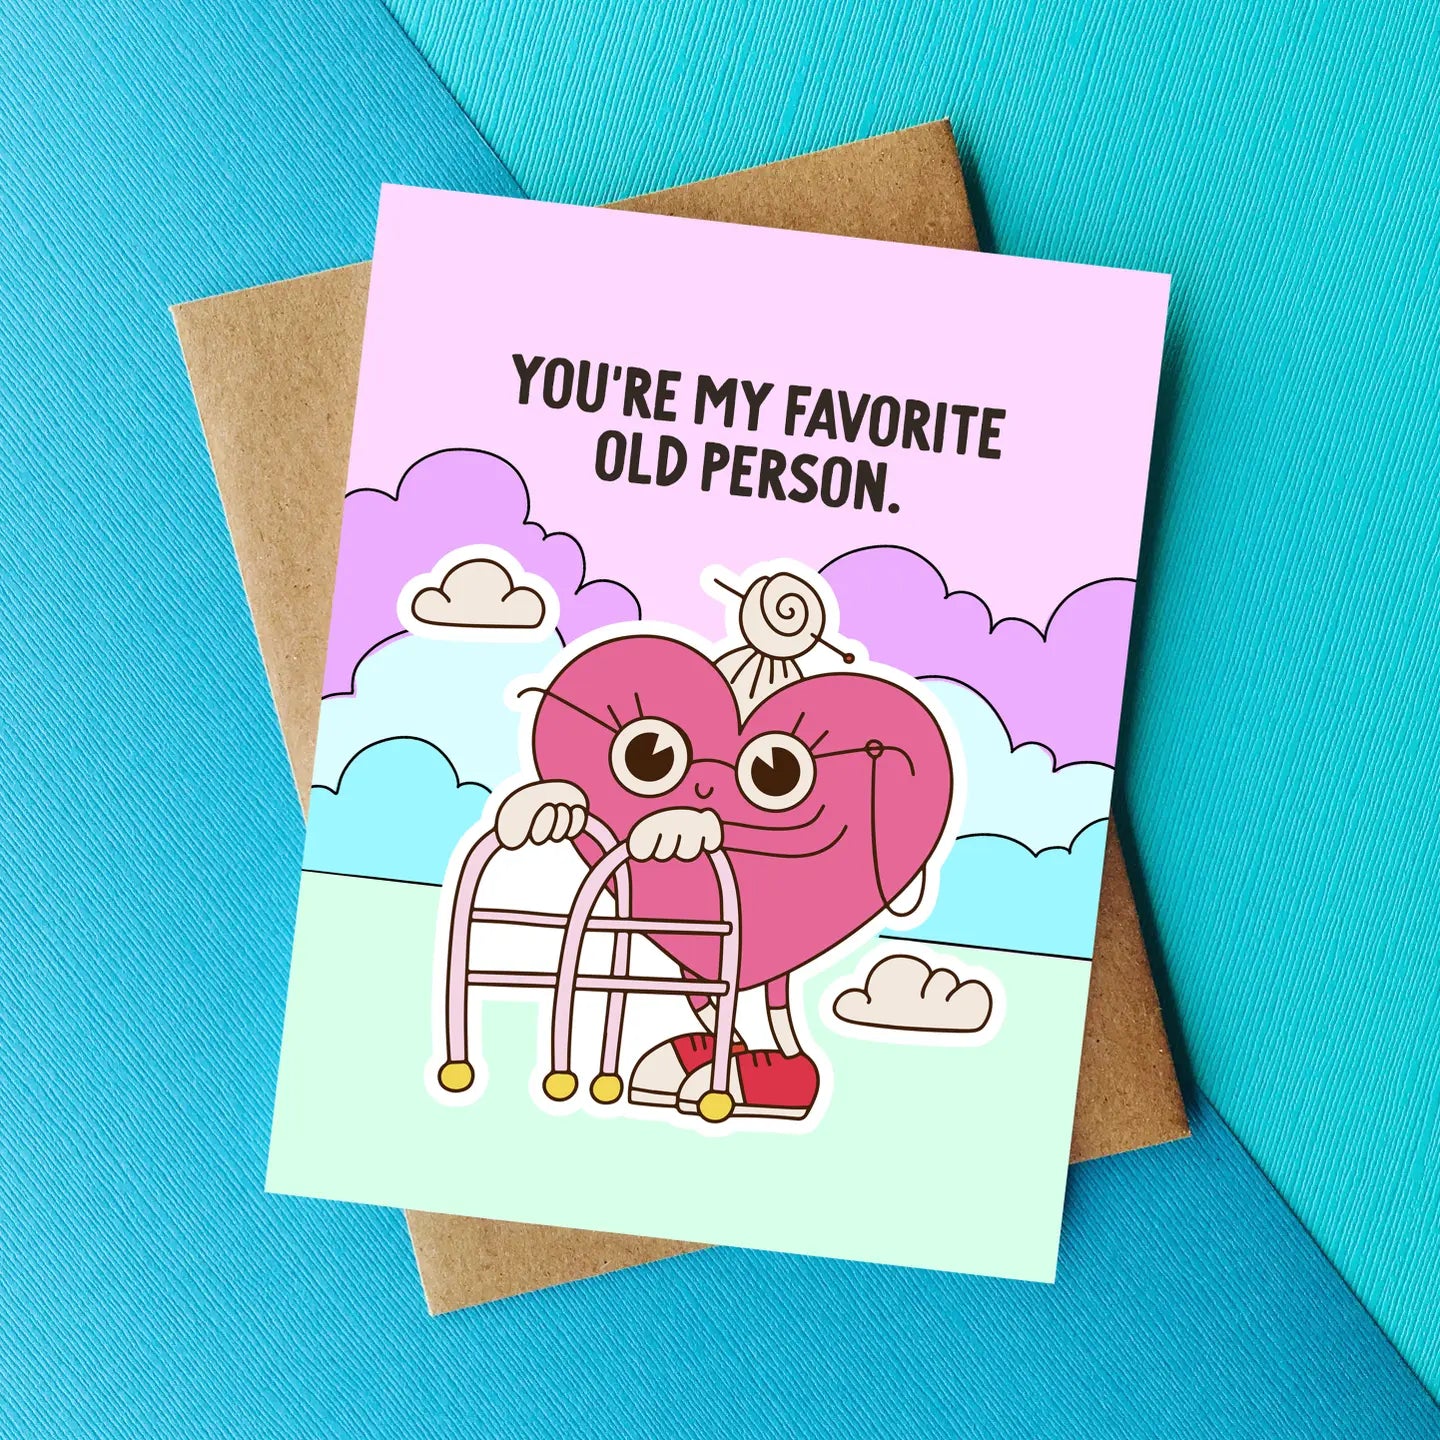 Top Hat and Monocle “My Favorite Old Person” Card